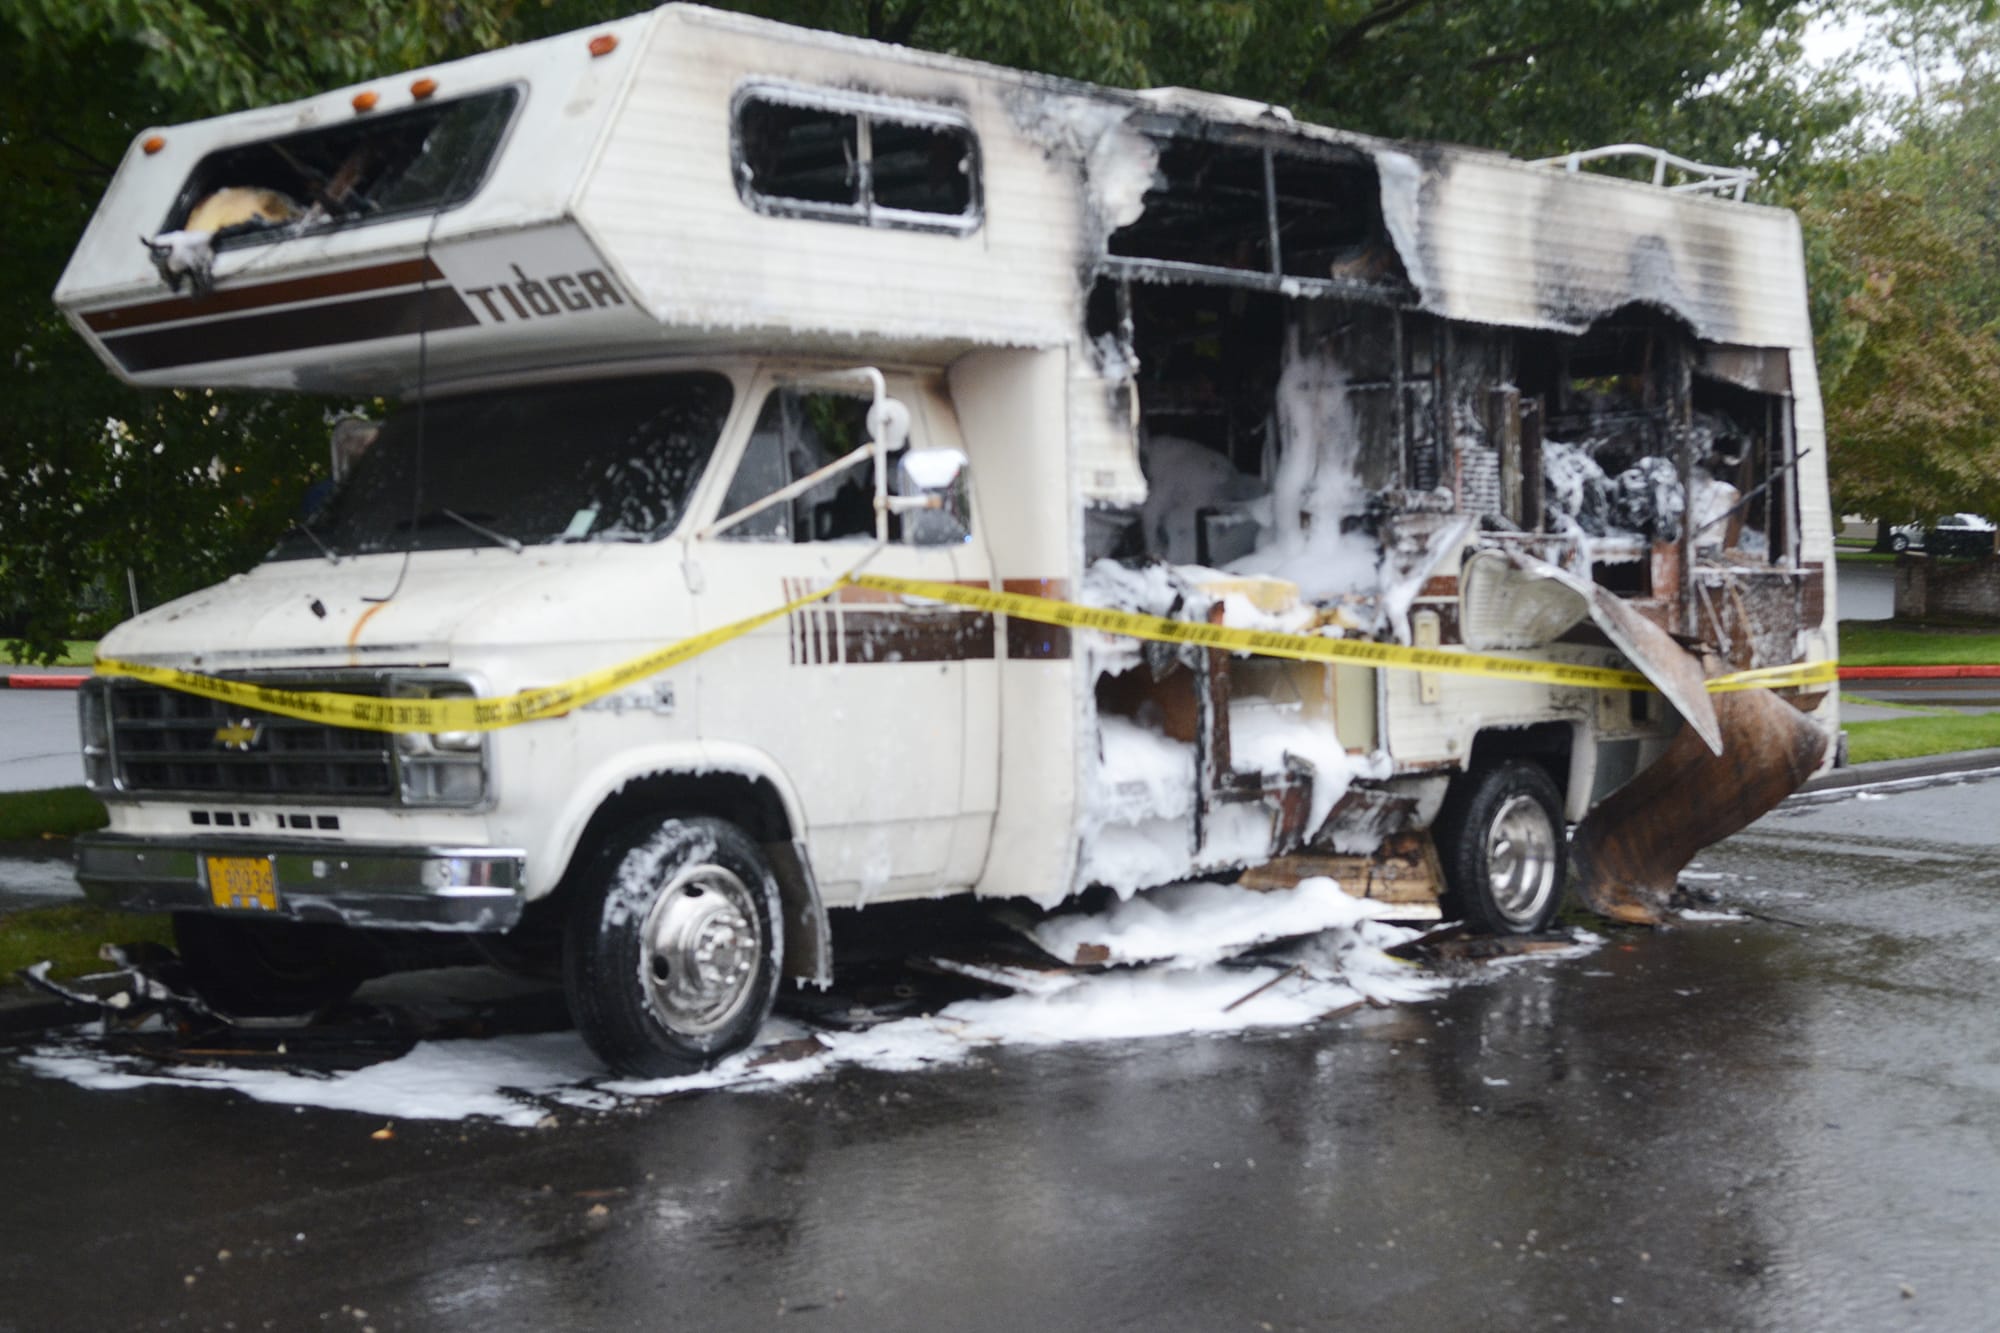 A man escaped uninjured after his RV caught fire in the East Minnehaha neighborhood Tuesday morning.